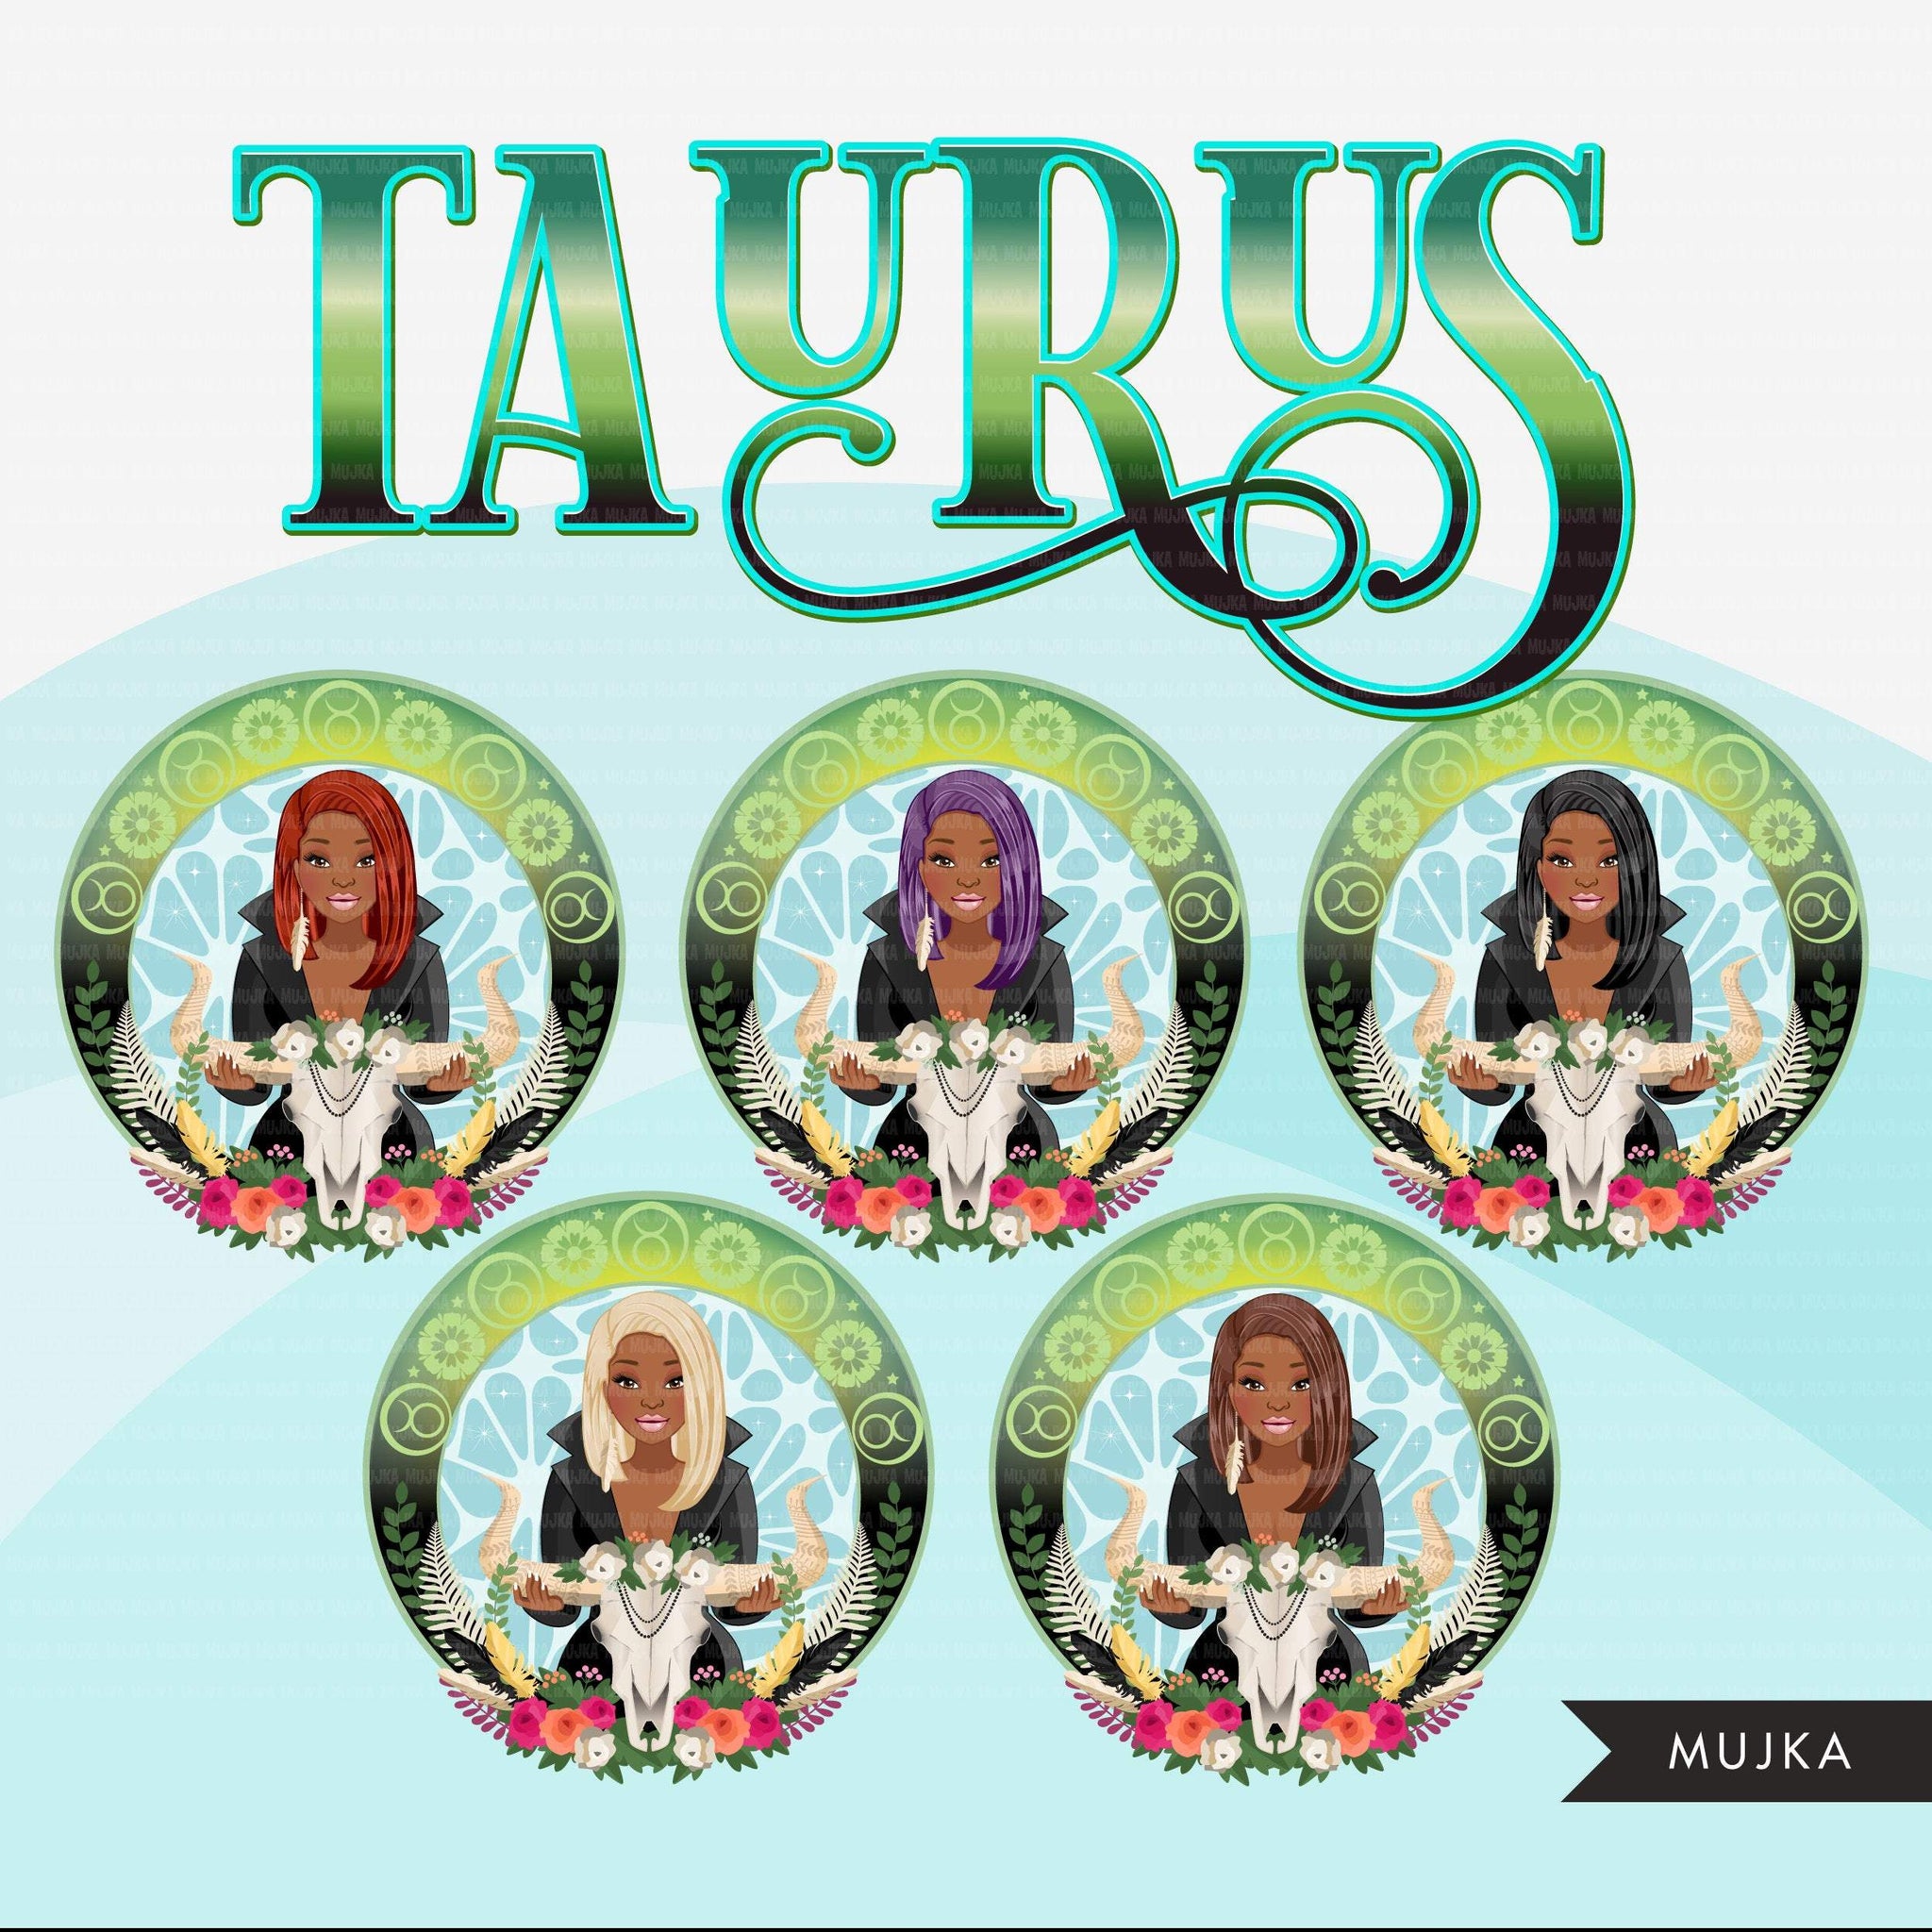 Zodiac Taurus Clipart, Png digital download, Sublimation Graphics for Cricut & Cameo, Black Woman Horoscope sign designs